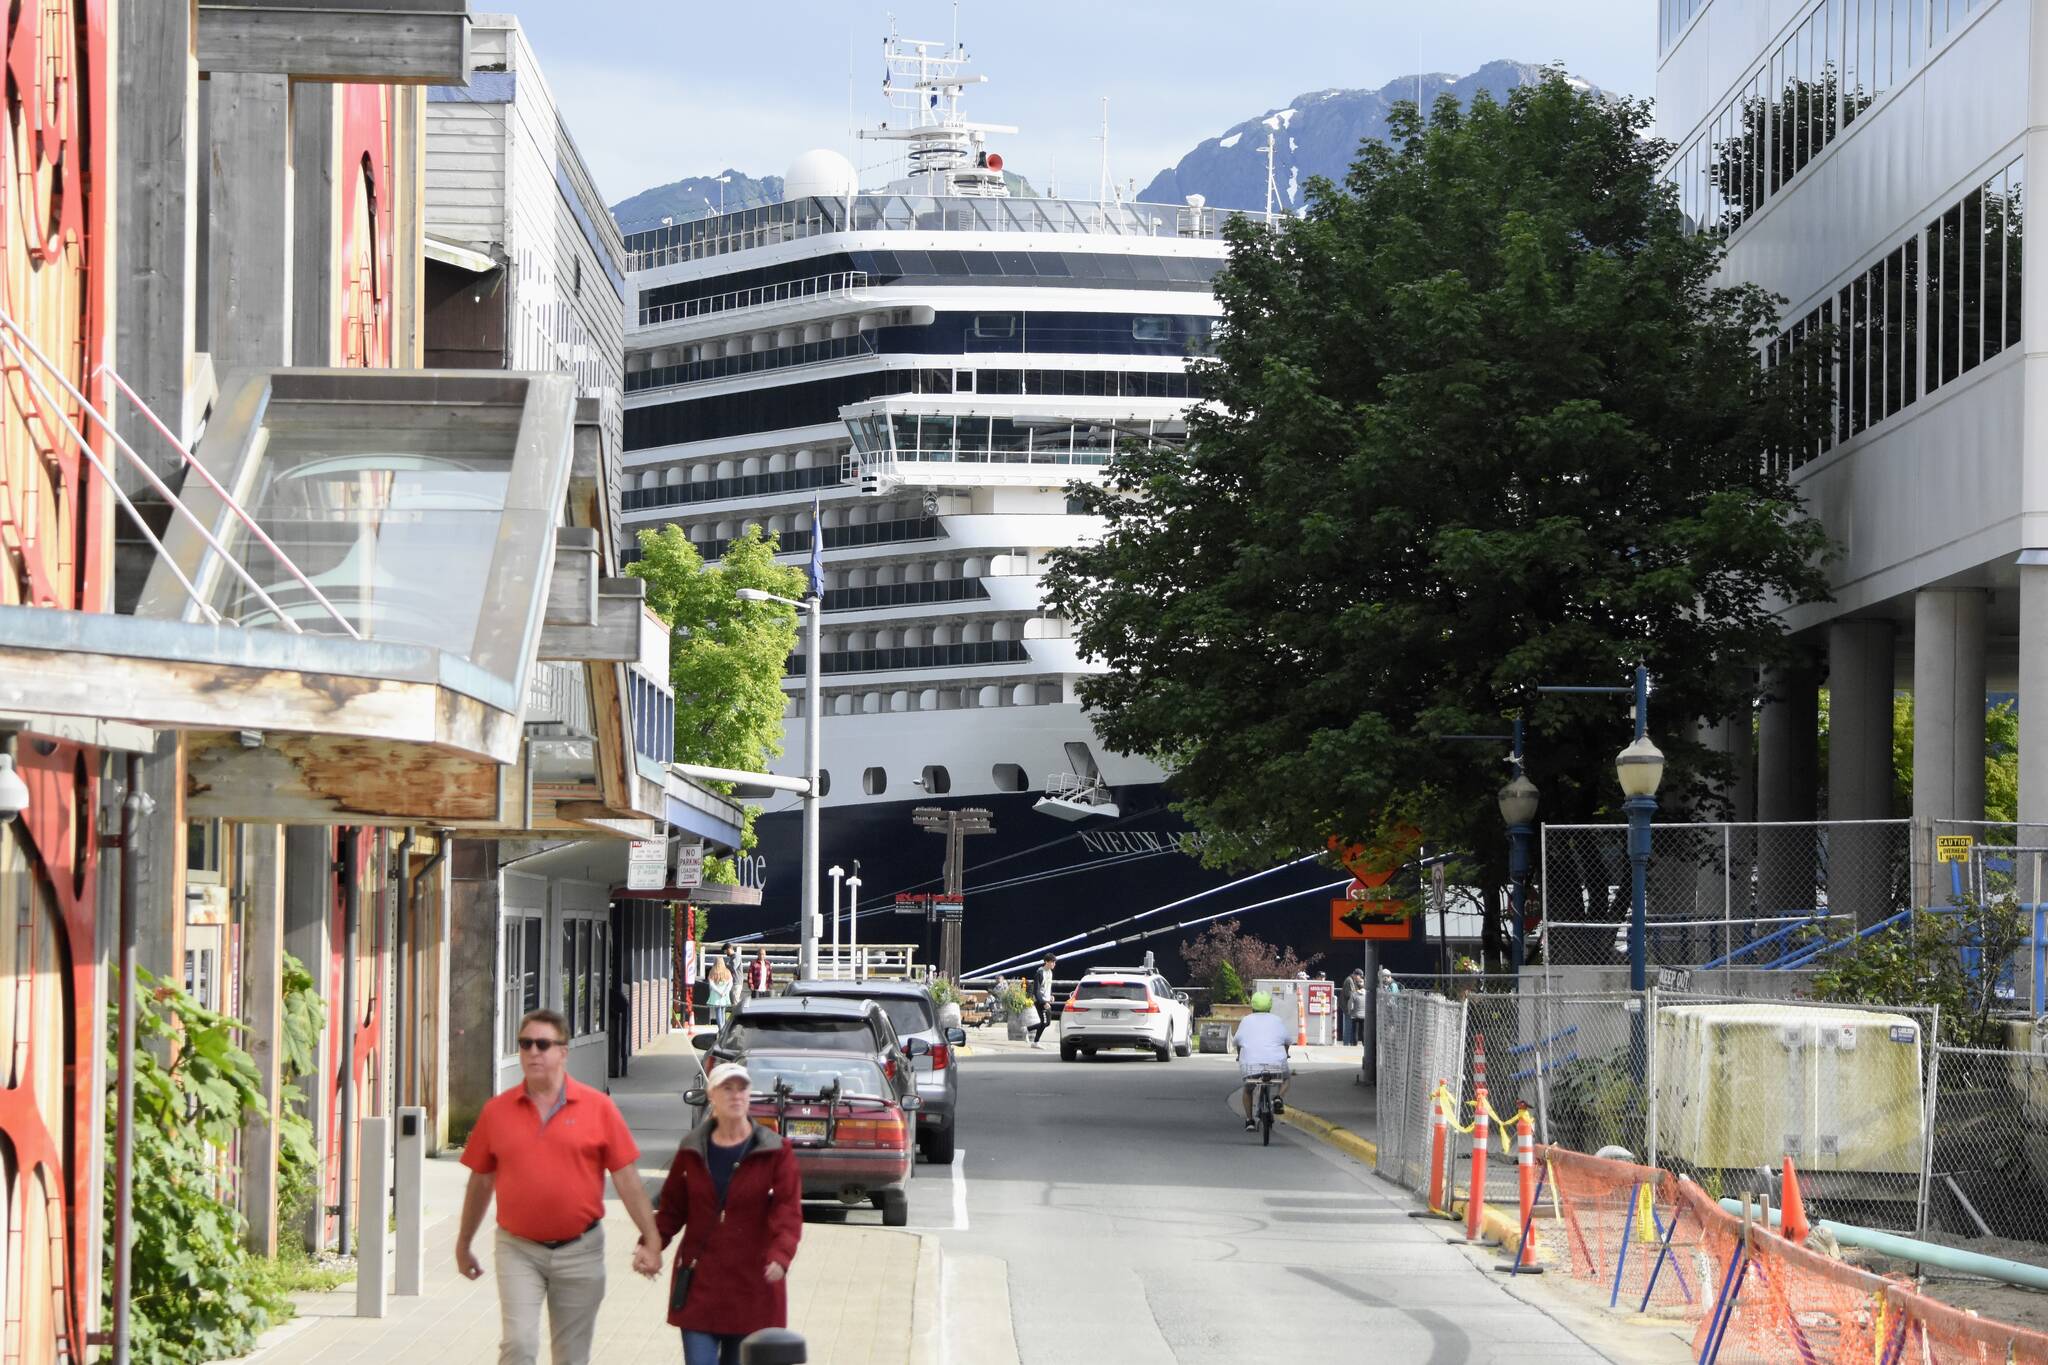 Industries related to cruise ships, like this one docked in downtown Juneau on July 26, 2021, were the most impacted by the COVID-19 pandemic according to a report from the McKinley Research Group. Senior economist at McKinley Jim Calvin says he’s concerned about businesses ability to hire enough workers going forward. (Peter Segall / Juneau Empire file)